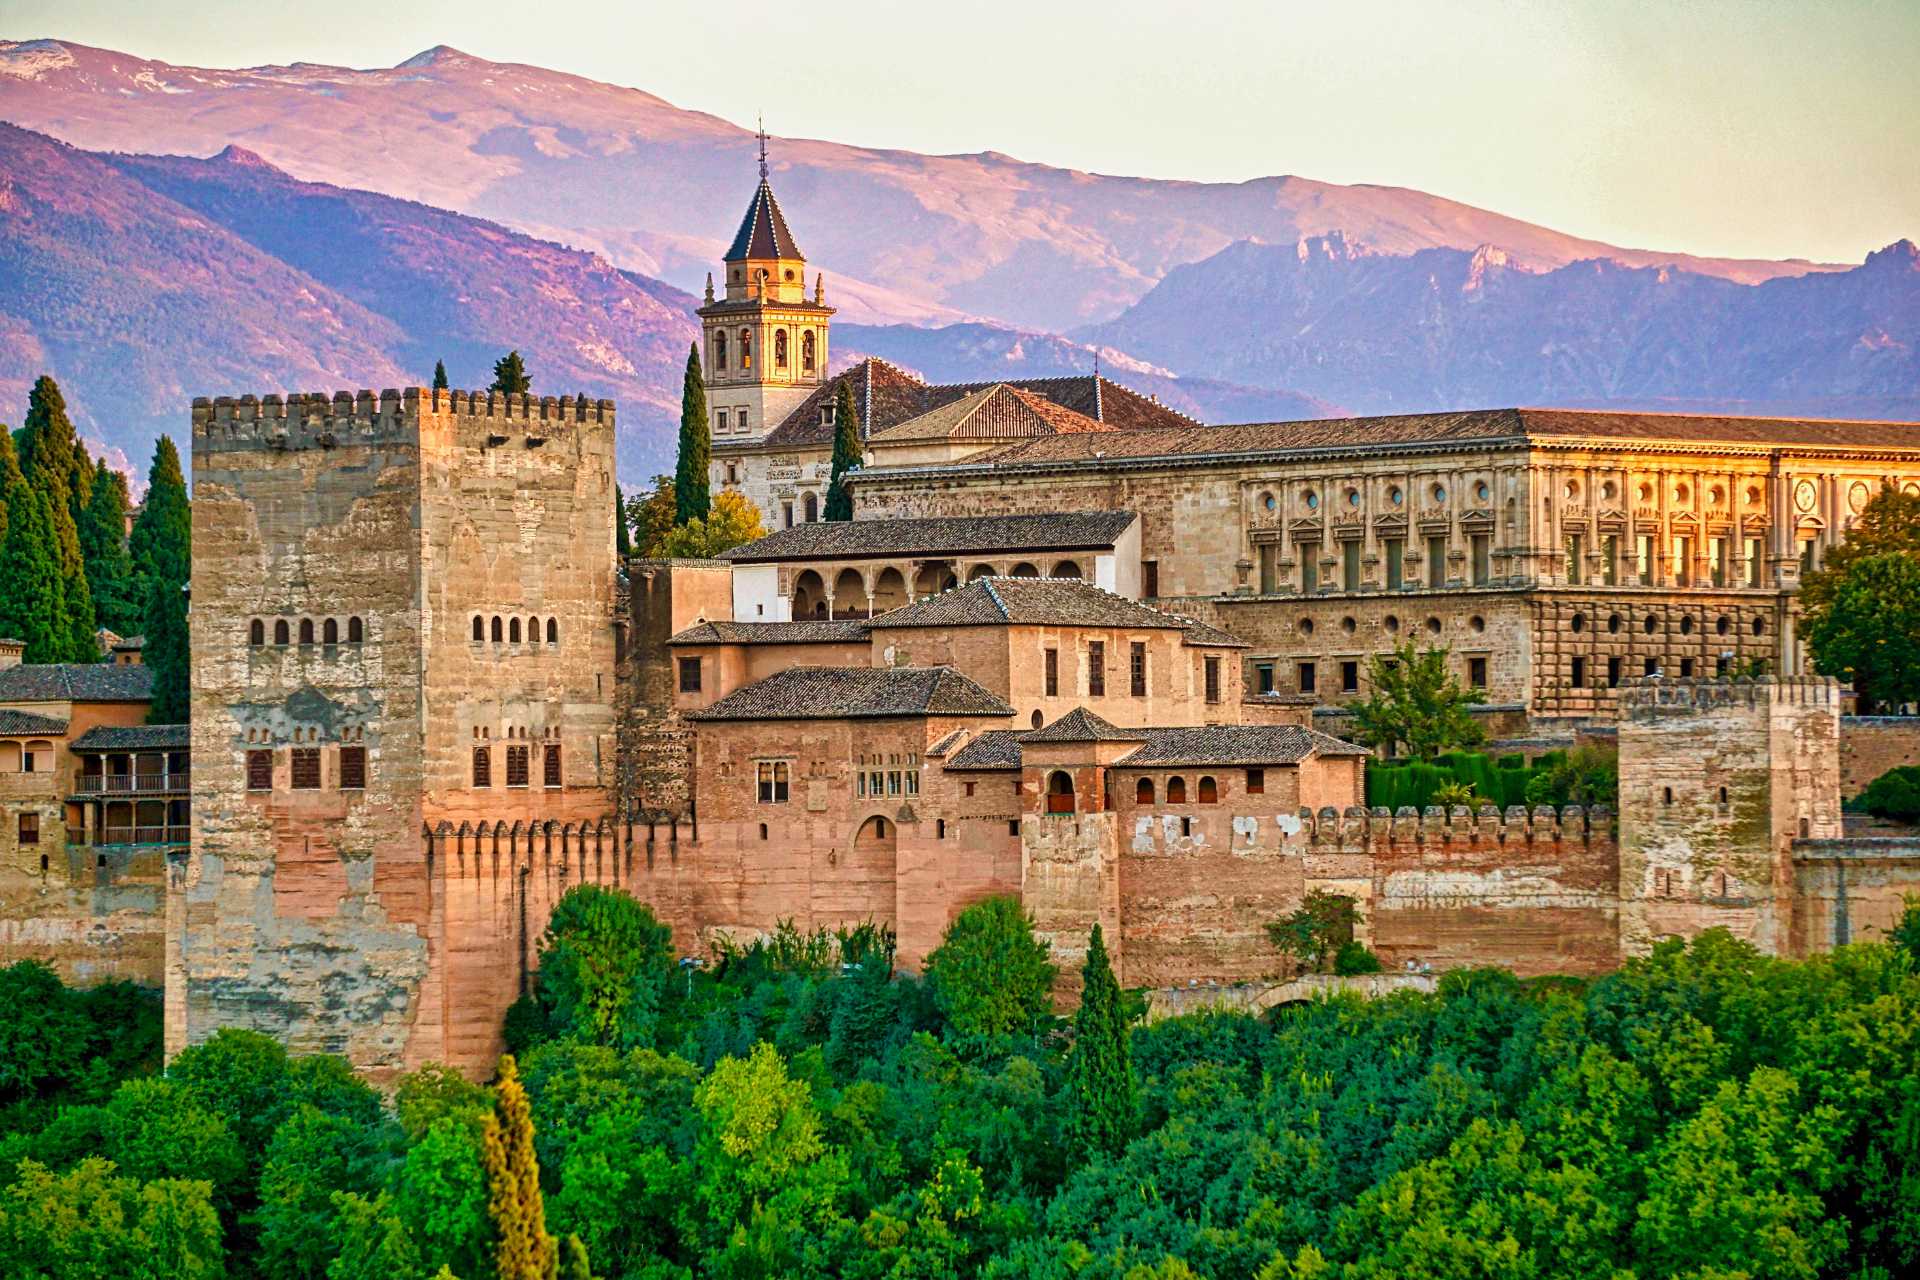 Alhambra Palace ©Getty Images